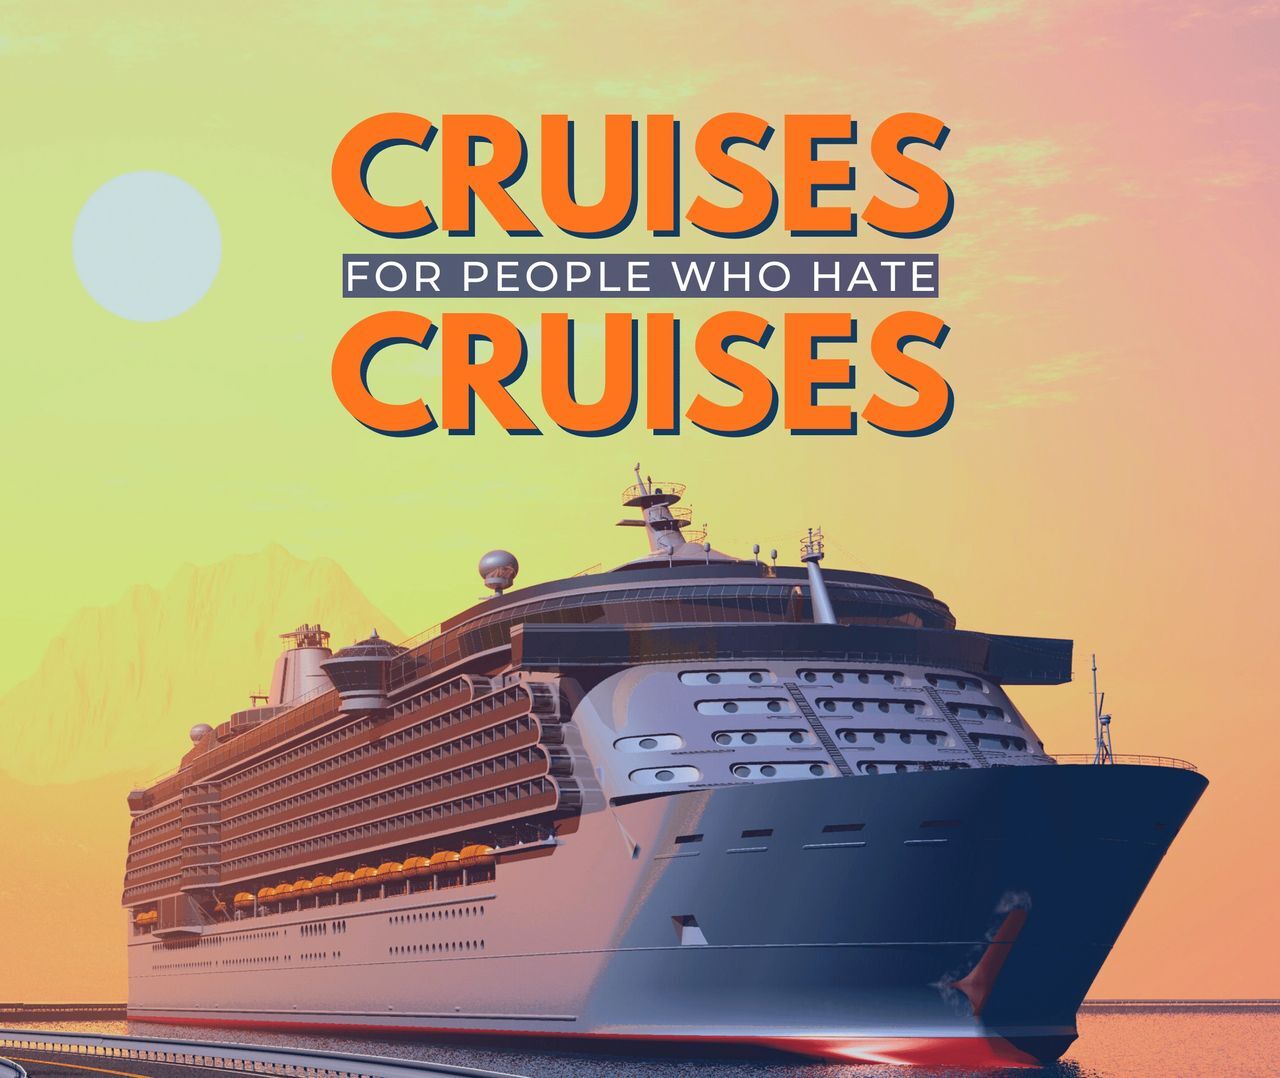 Promotional graphic for cruises aimed at non-traditional cruise goers with a cruise ship at sunset.